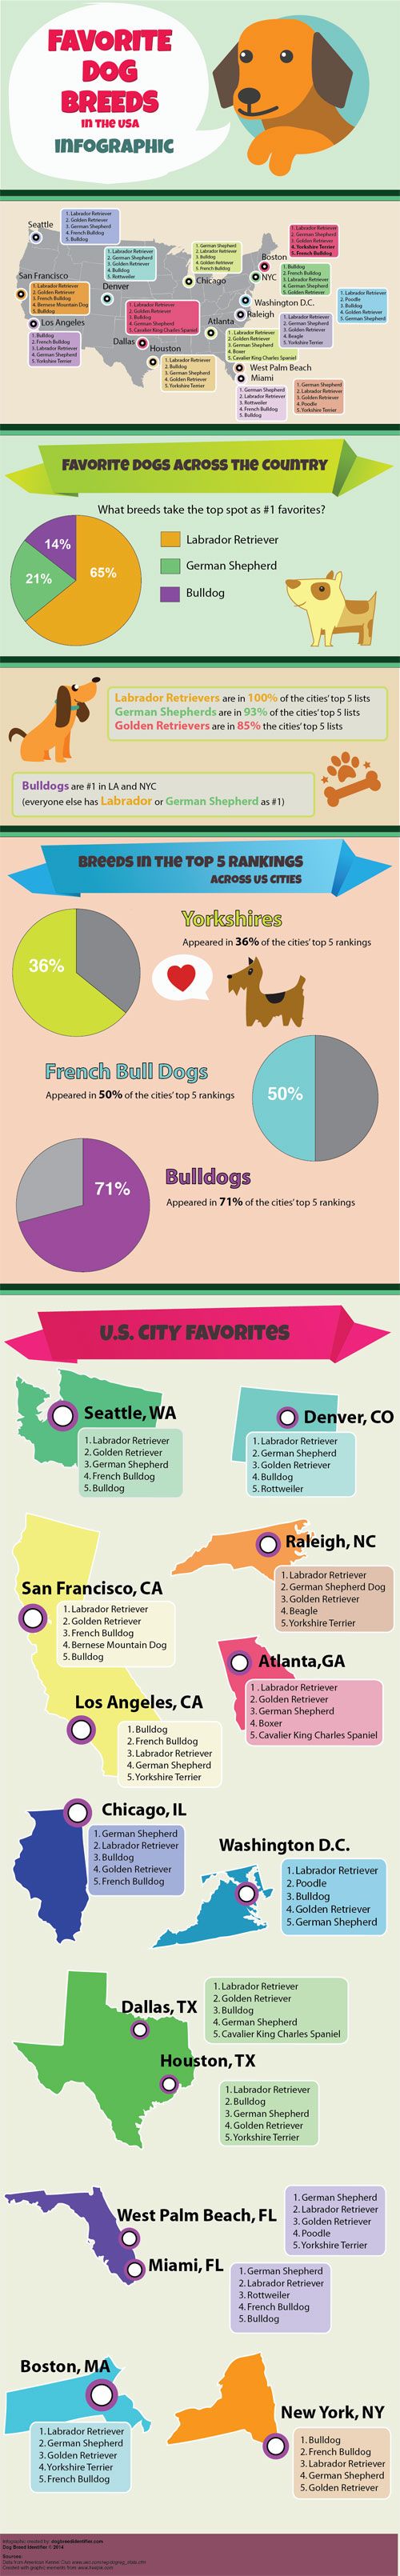 Most Popular Dog Breeds in United States